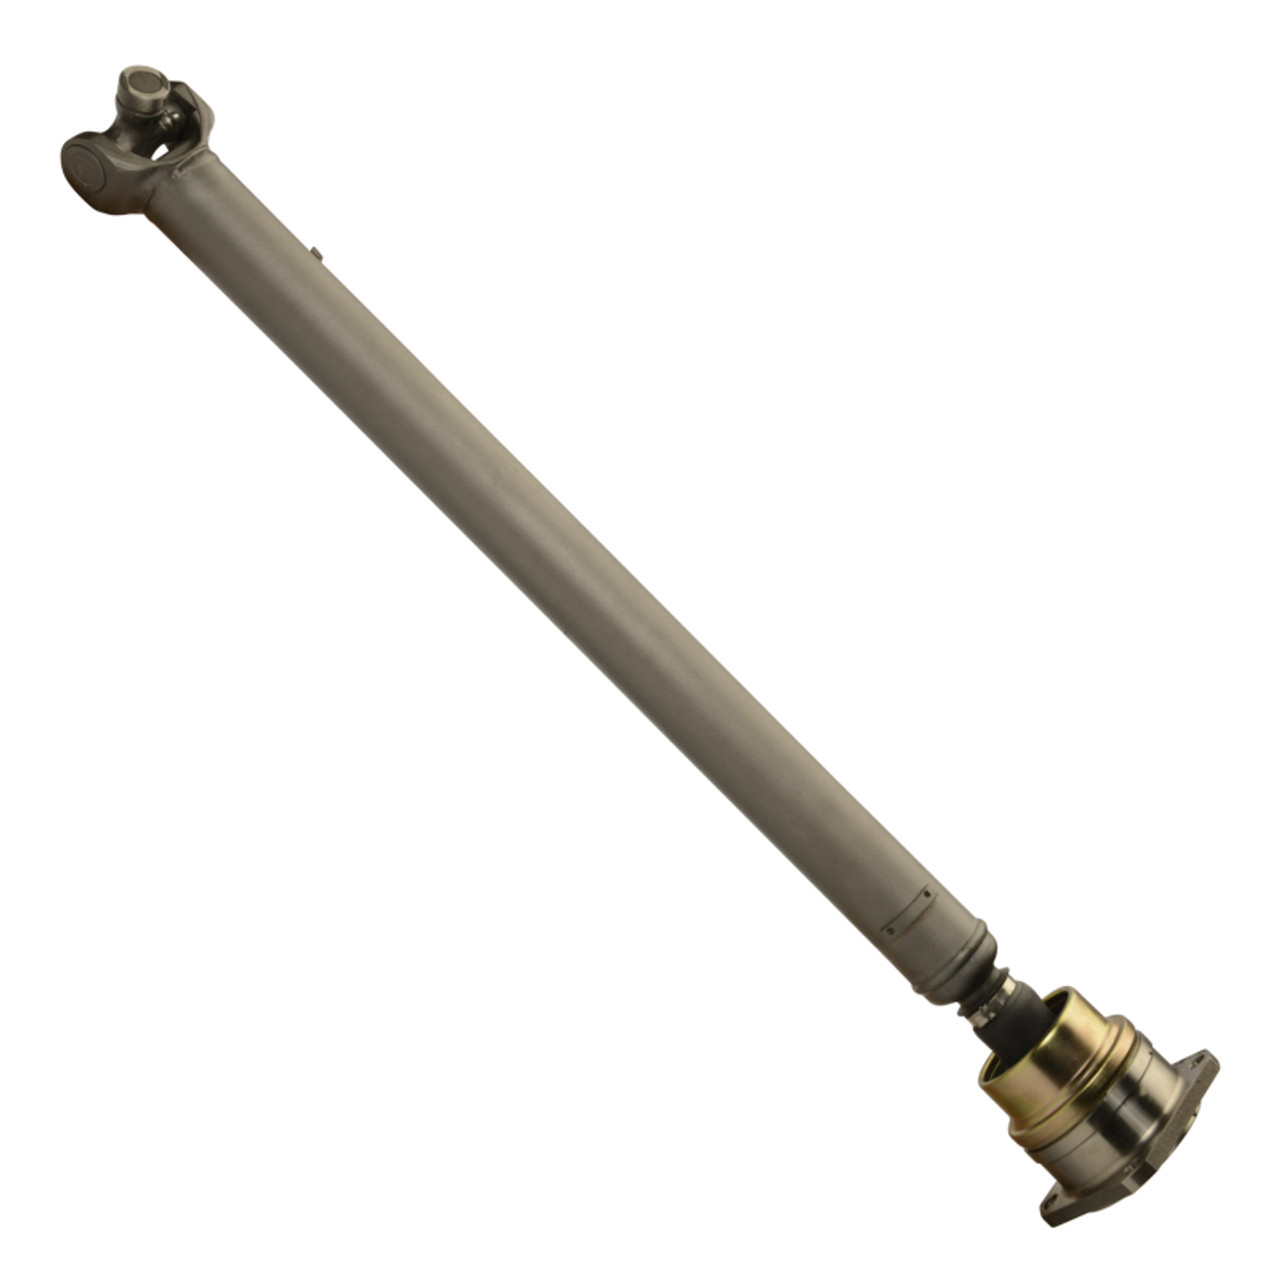 Yukon Gear & Axle USA Standard Front Driveshaft Hummer H3 23-5/8in Weld to Weld - ZDS9492 Photo - Primary